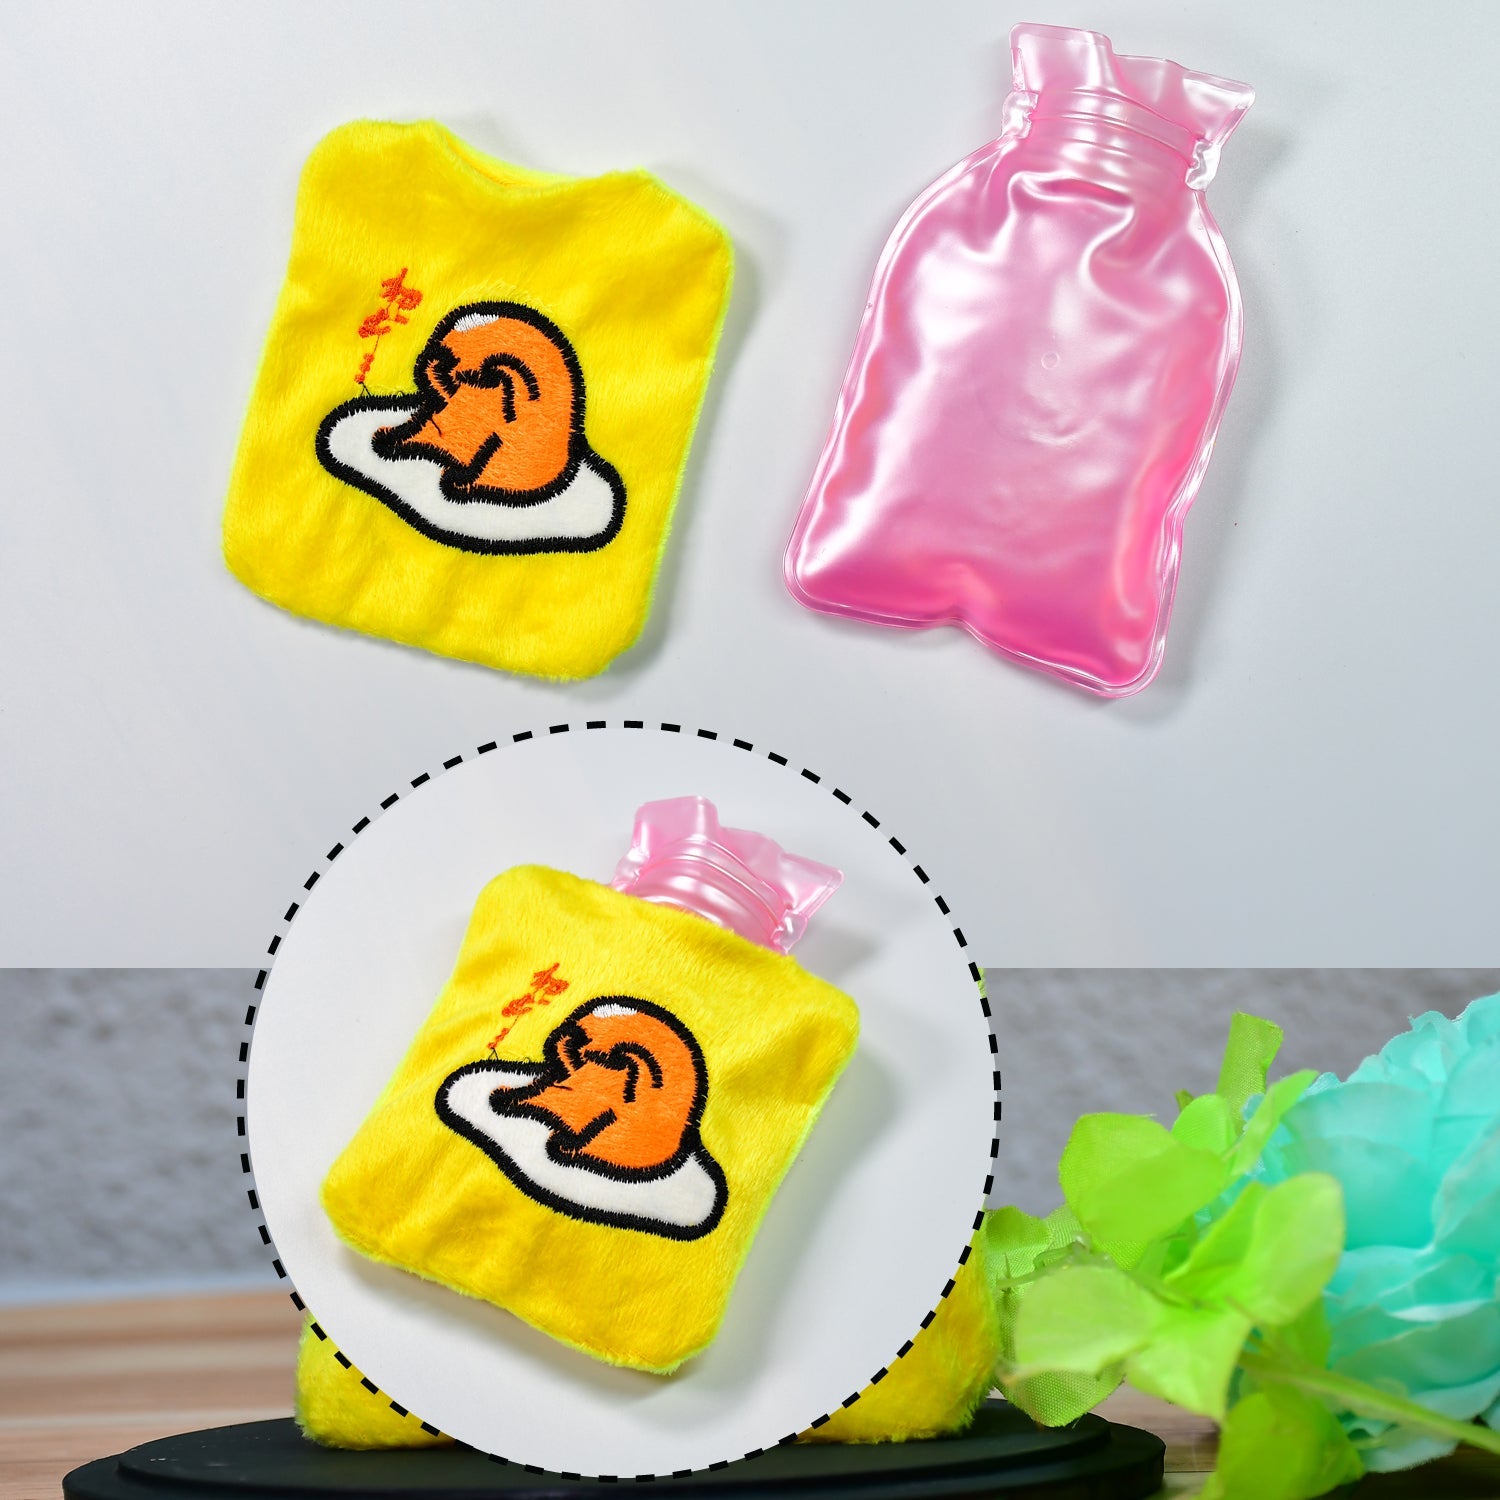 6515 Yellow Duck Head Small Hot Water Bag with Cover for Pain Relief, Neck, Shoulder Pain and Hand, Feet Warmer, Menstrual Cramps. DeoDap